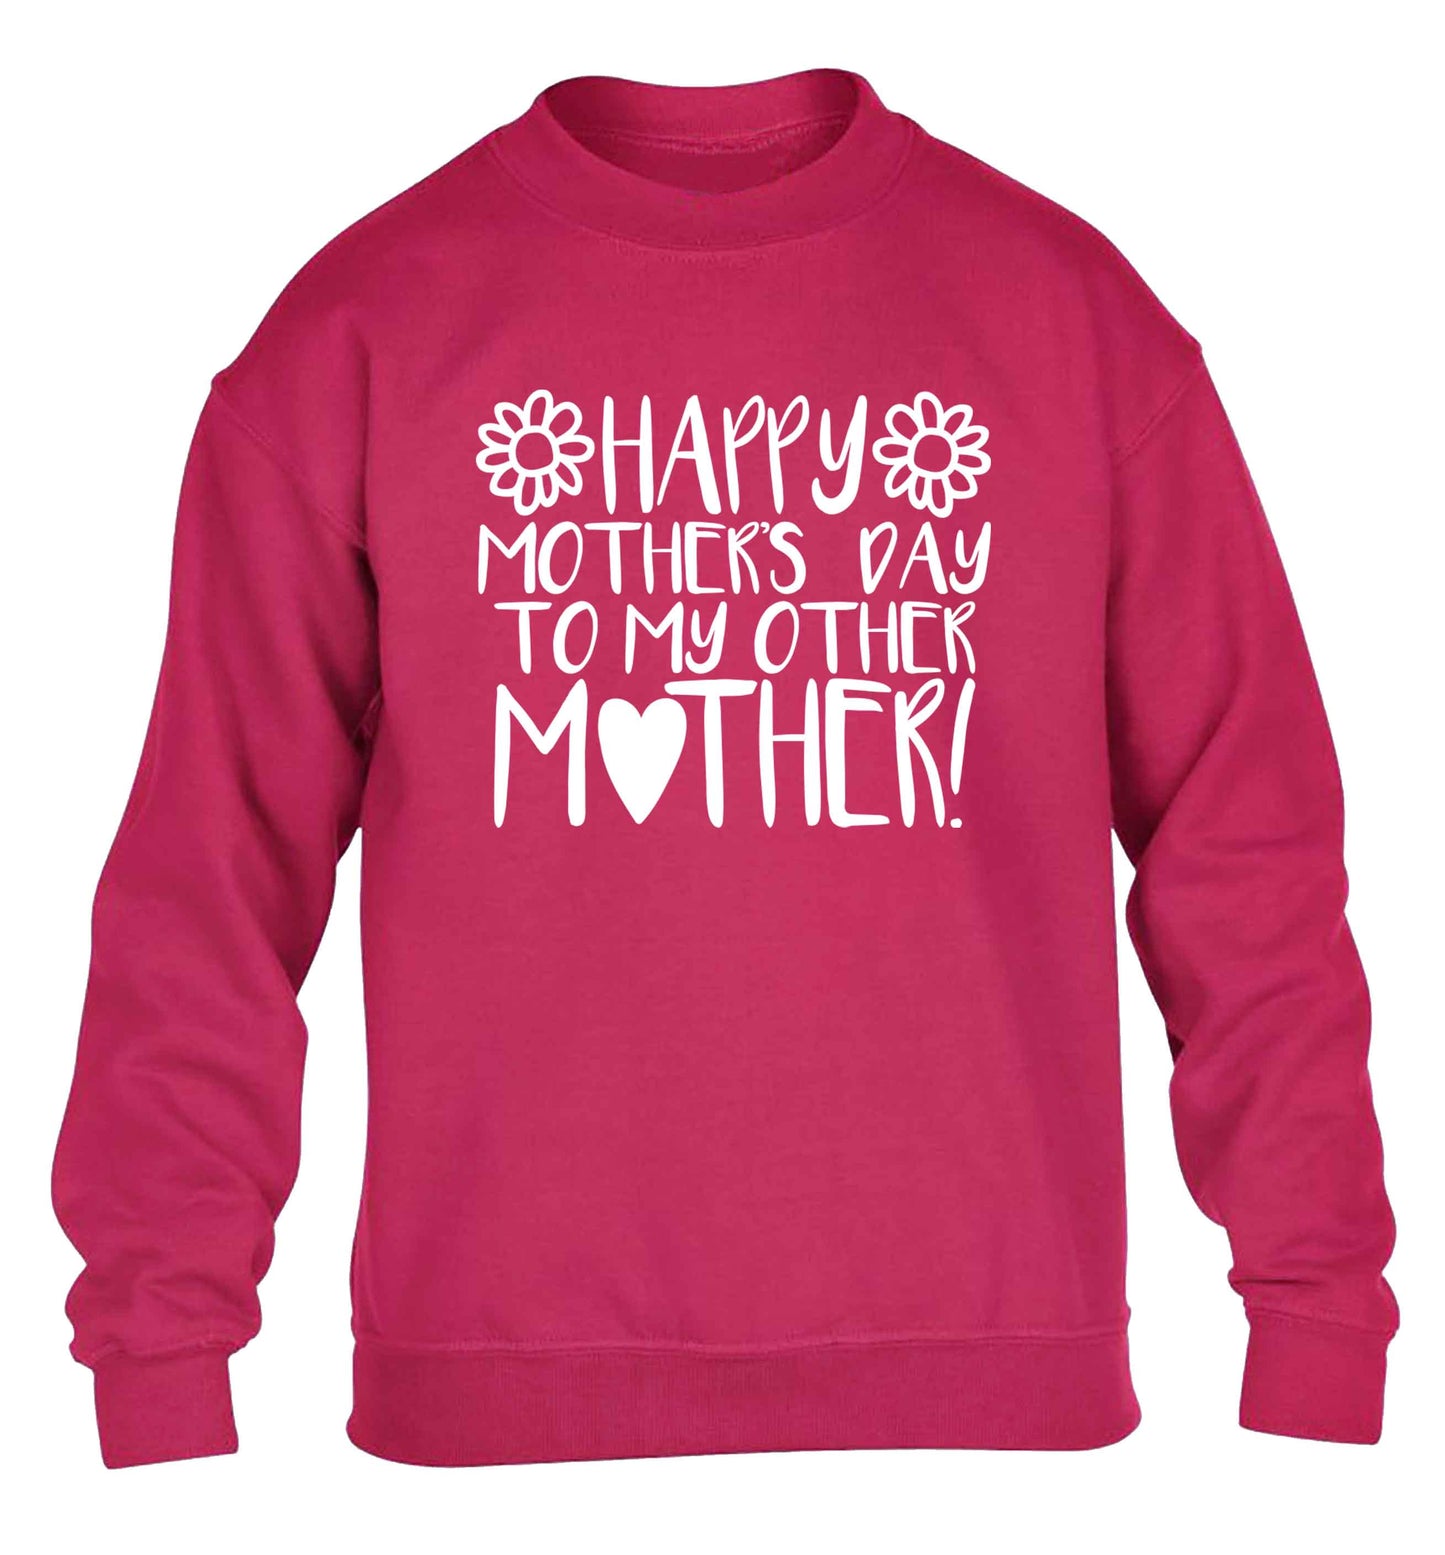 Happy mother's day to my other mother children's pink sweater 12-13 Years